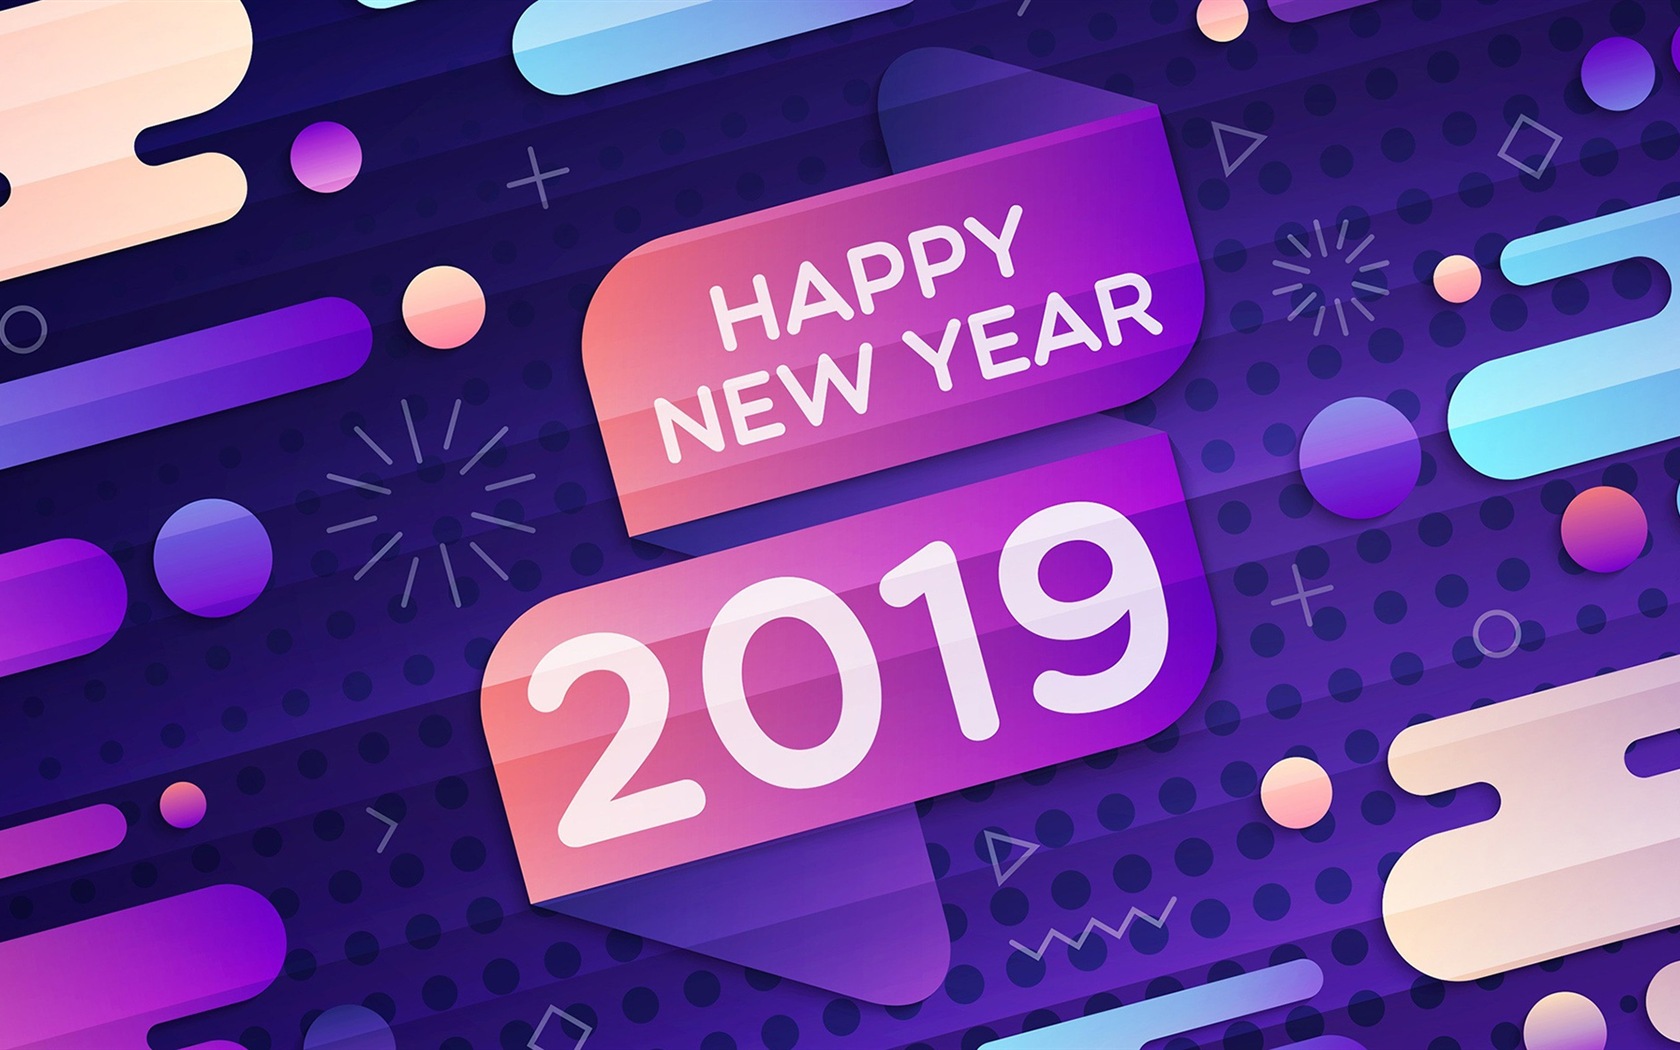 Happy New Year 2019 HD wallpapers #10 - 1680x1050